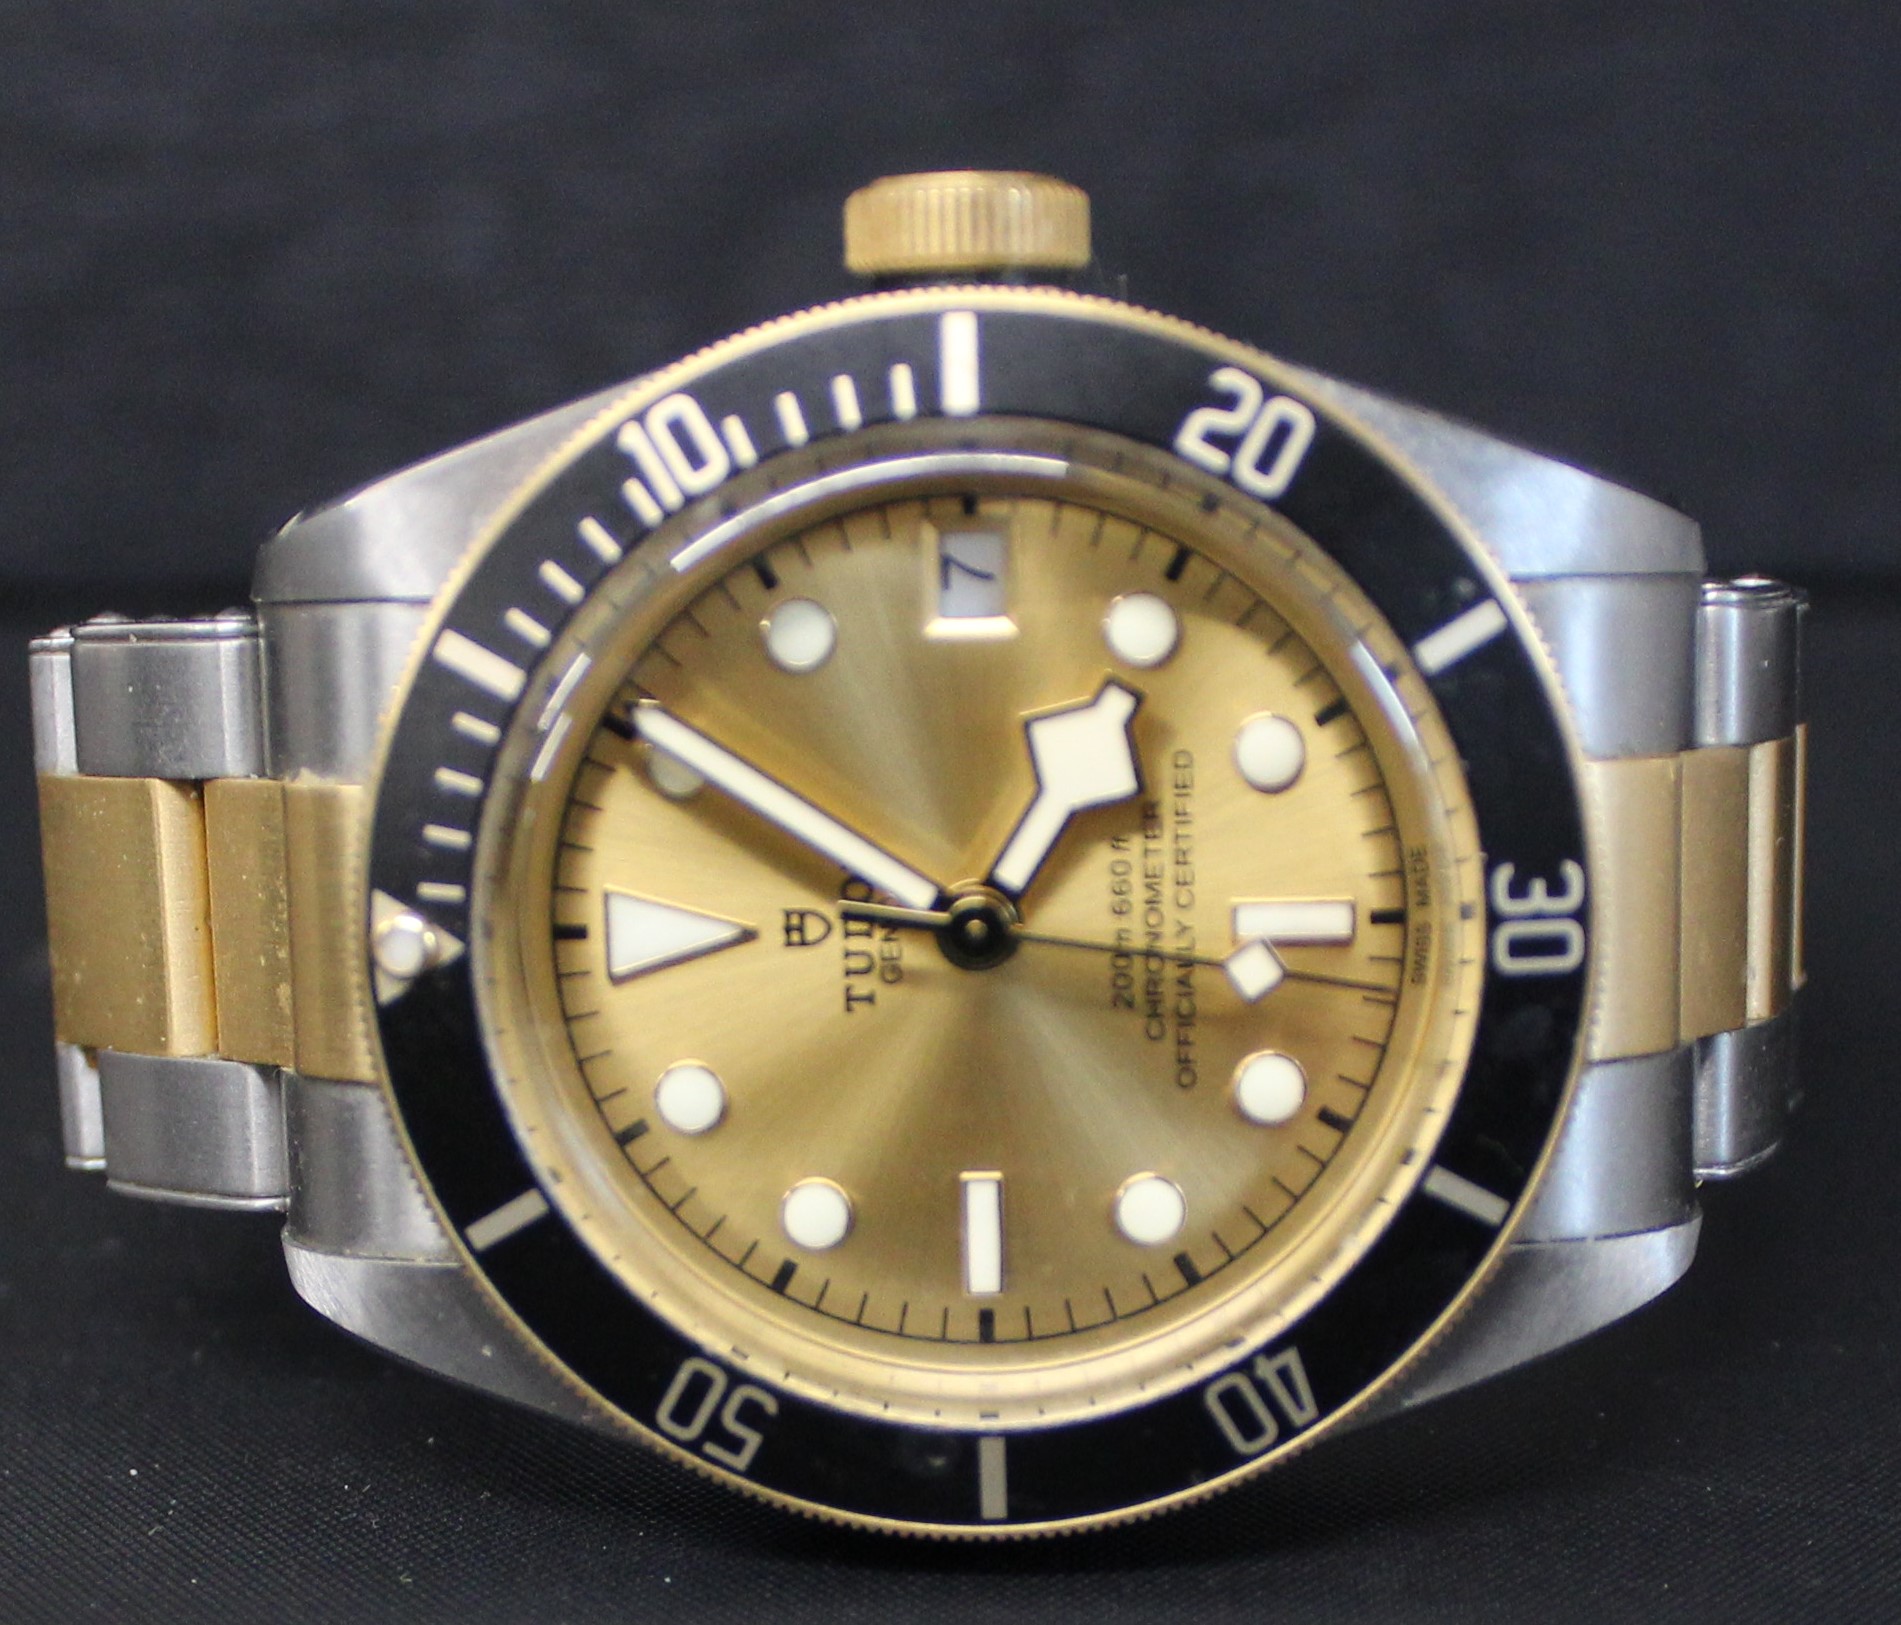 Gents Tudor Black Bay Chronometer stainless steel wristwatch, champagne dial, serial number 9135709, - Image 7 of 10